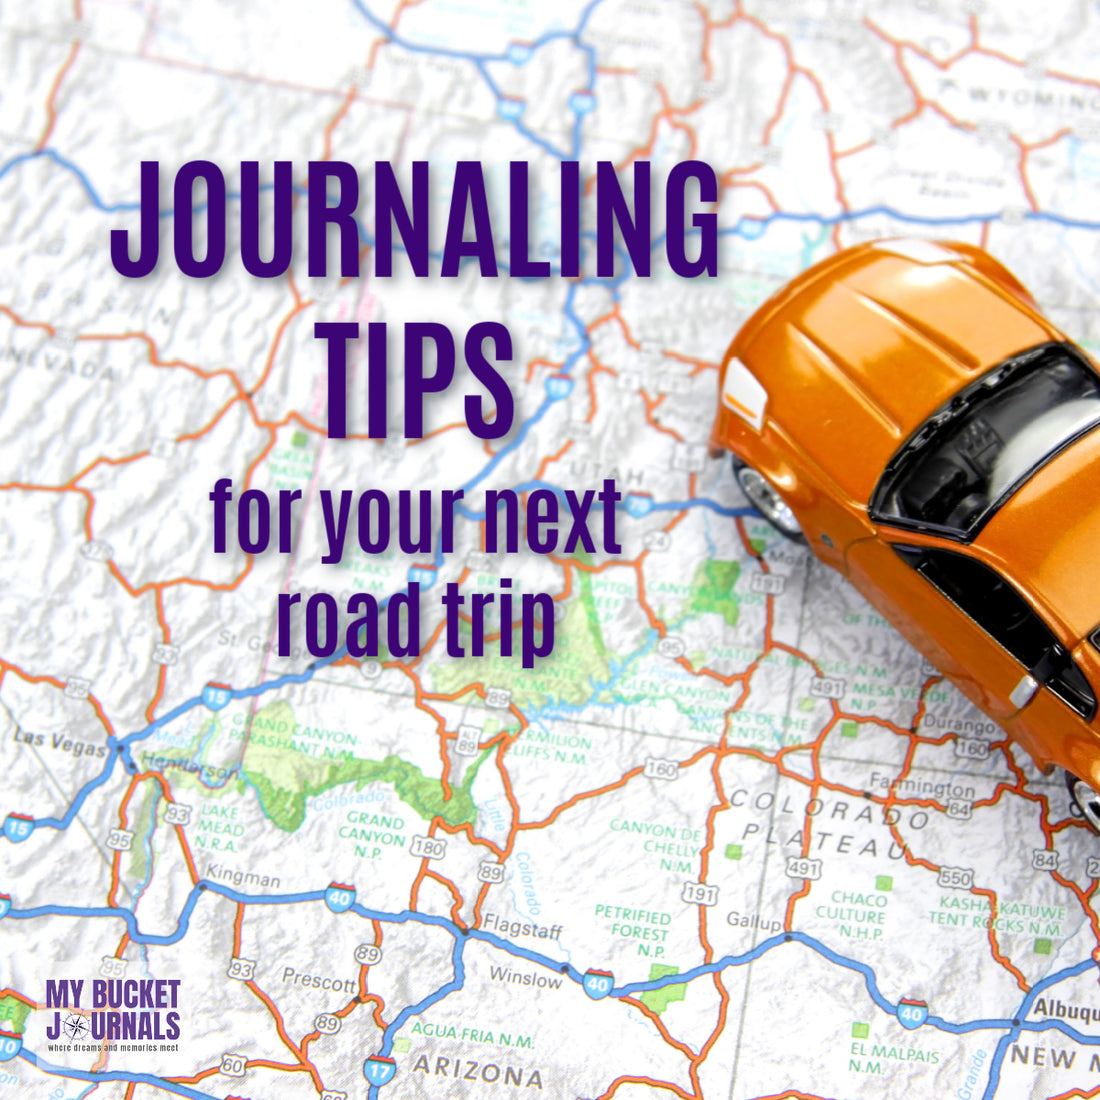 a road map with an orange toy car, has a text overlay saying Journaling Tips for your next road trip